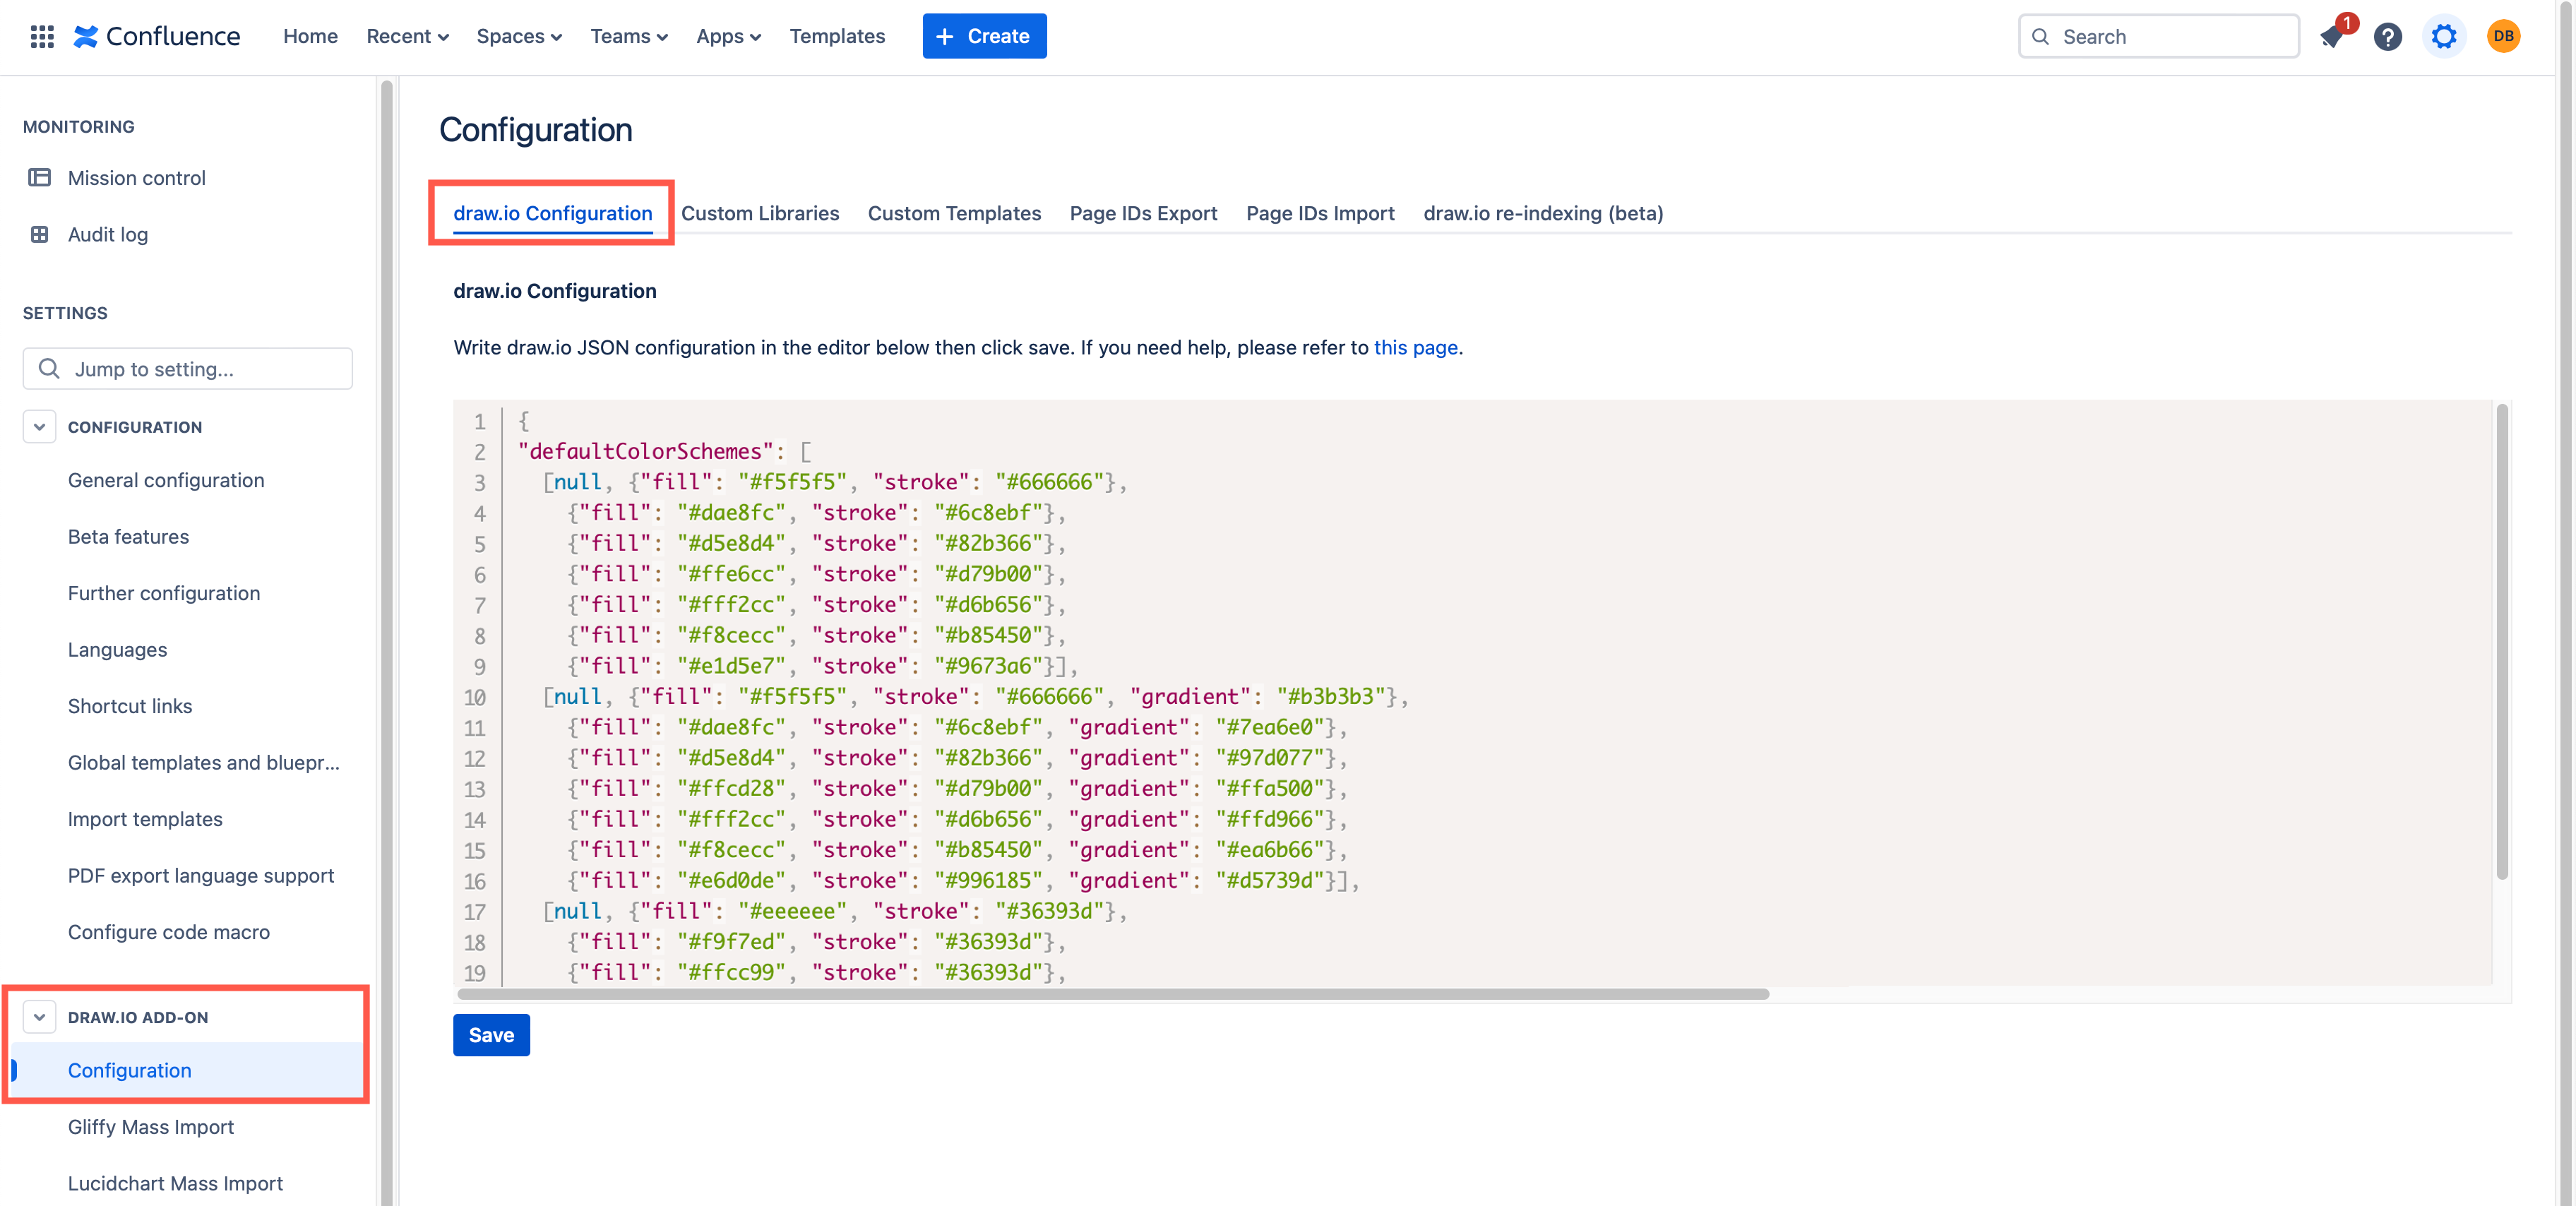 Administrators can specify custom colours for draw.io in Confluence Cloud